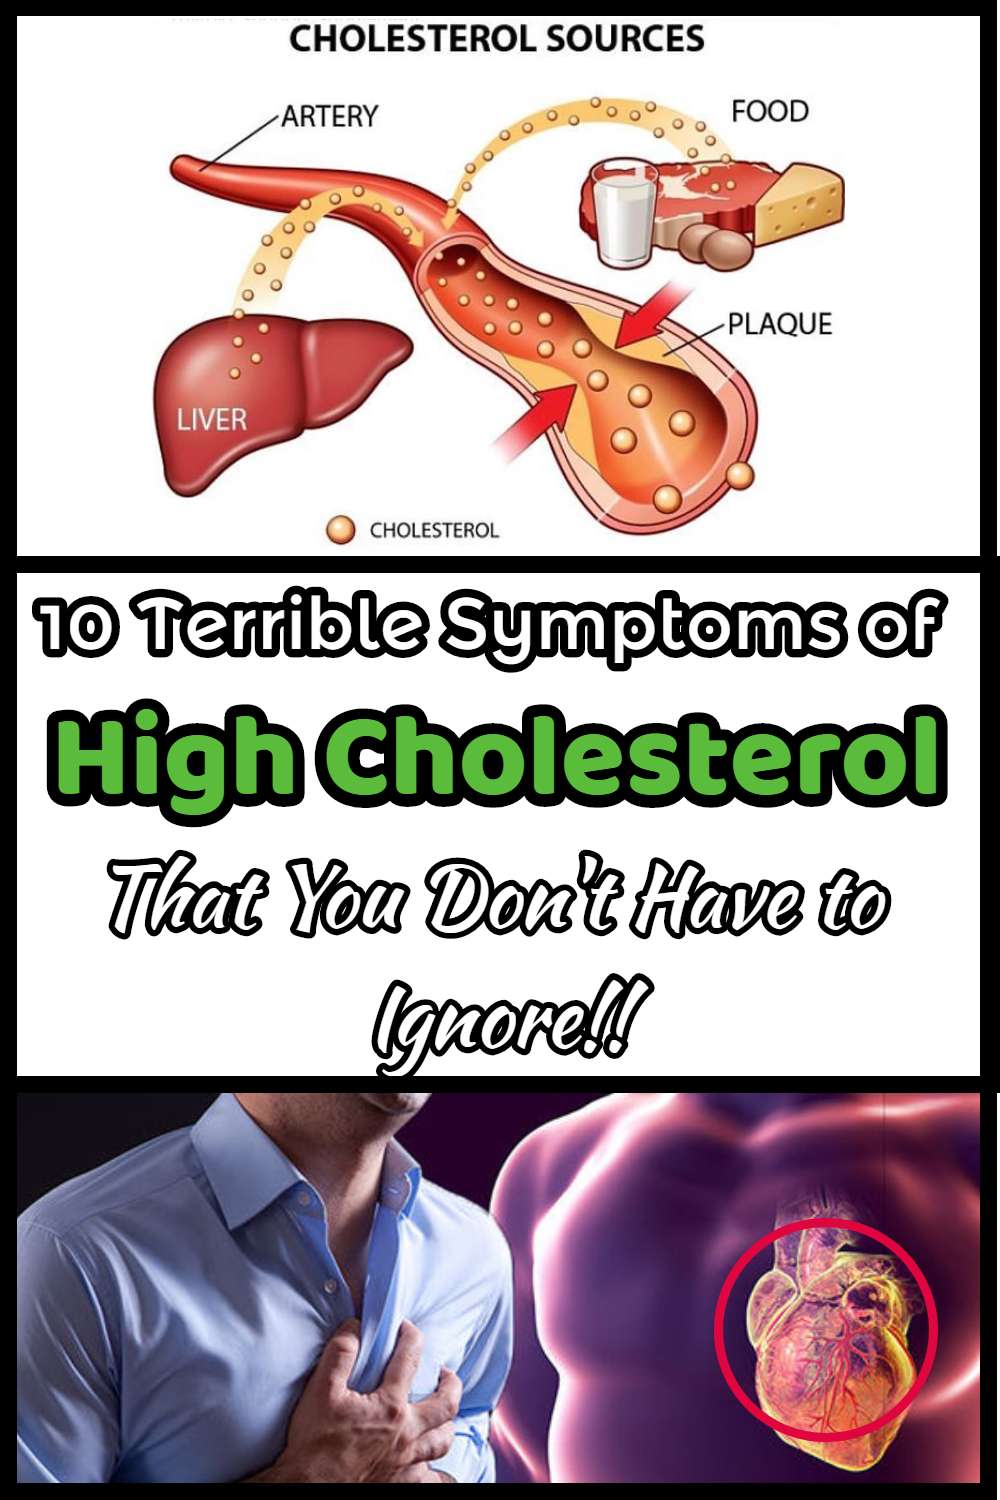 10 Terrible Symptoms of High Cholesterol That You Don